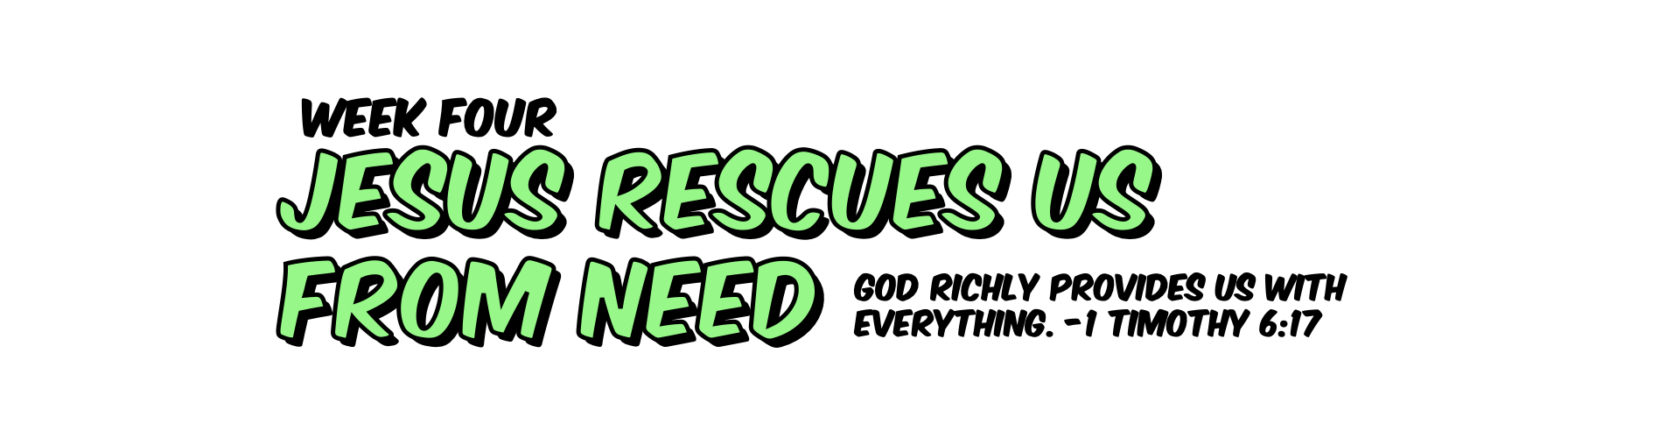 Jesus Rescues Us From Need. VBS At Home.